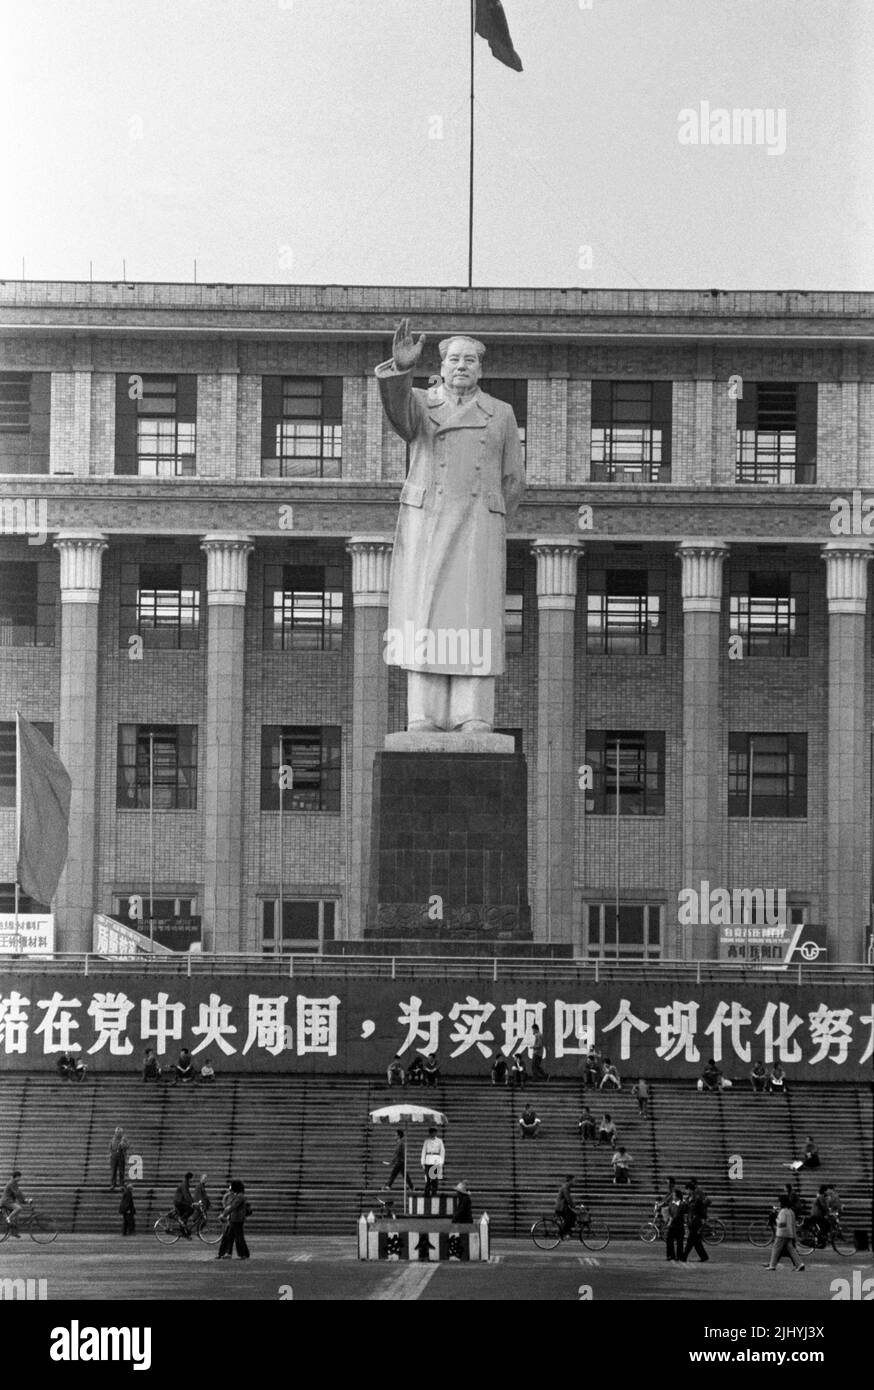 STATUE OF MAO in Xian China looks over the residents for consideration Stock Photo